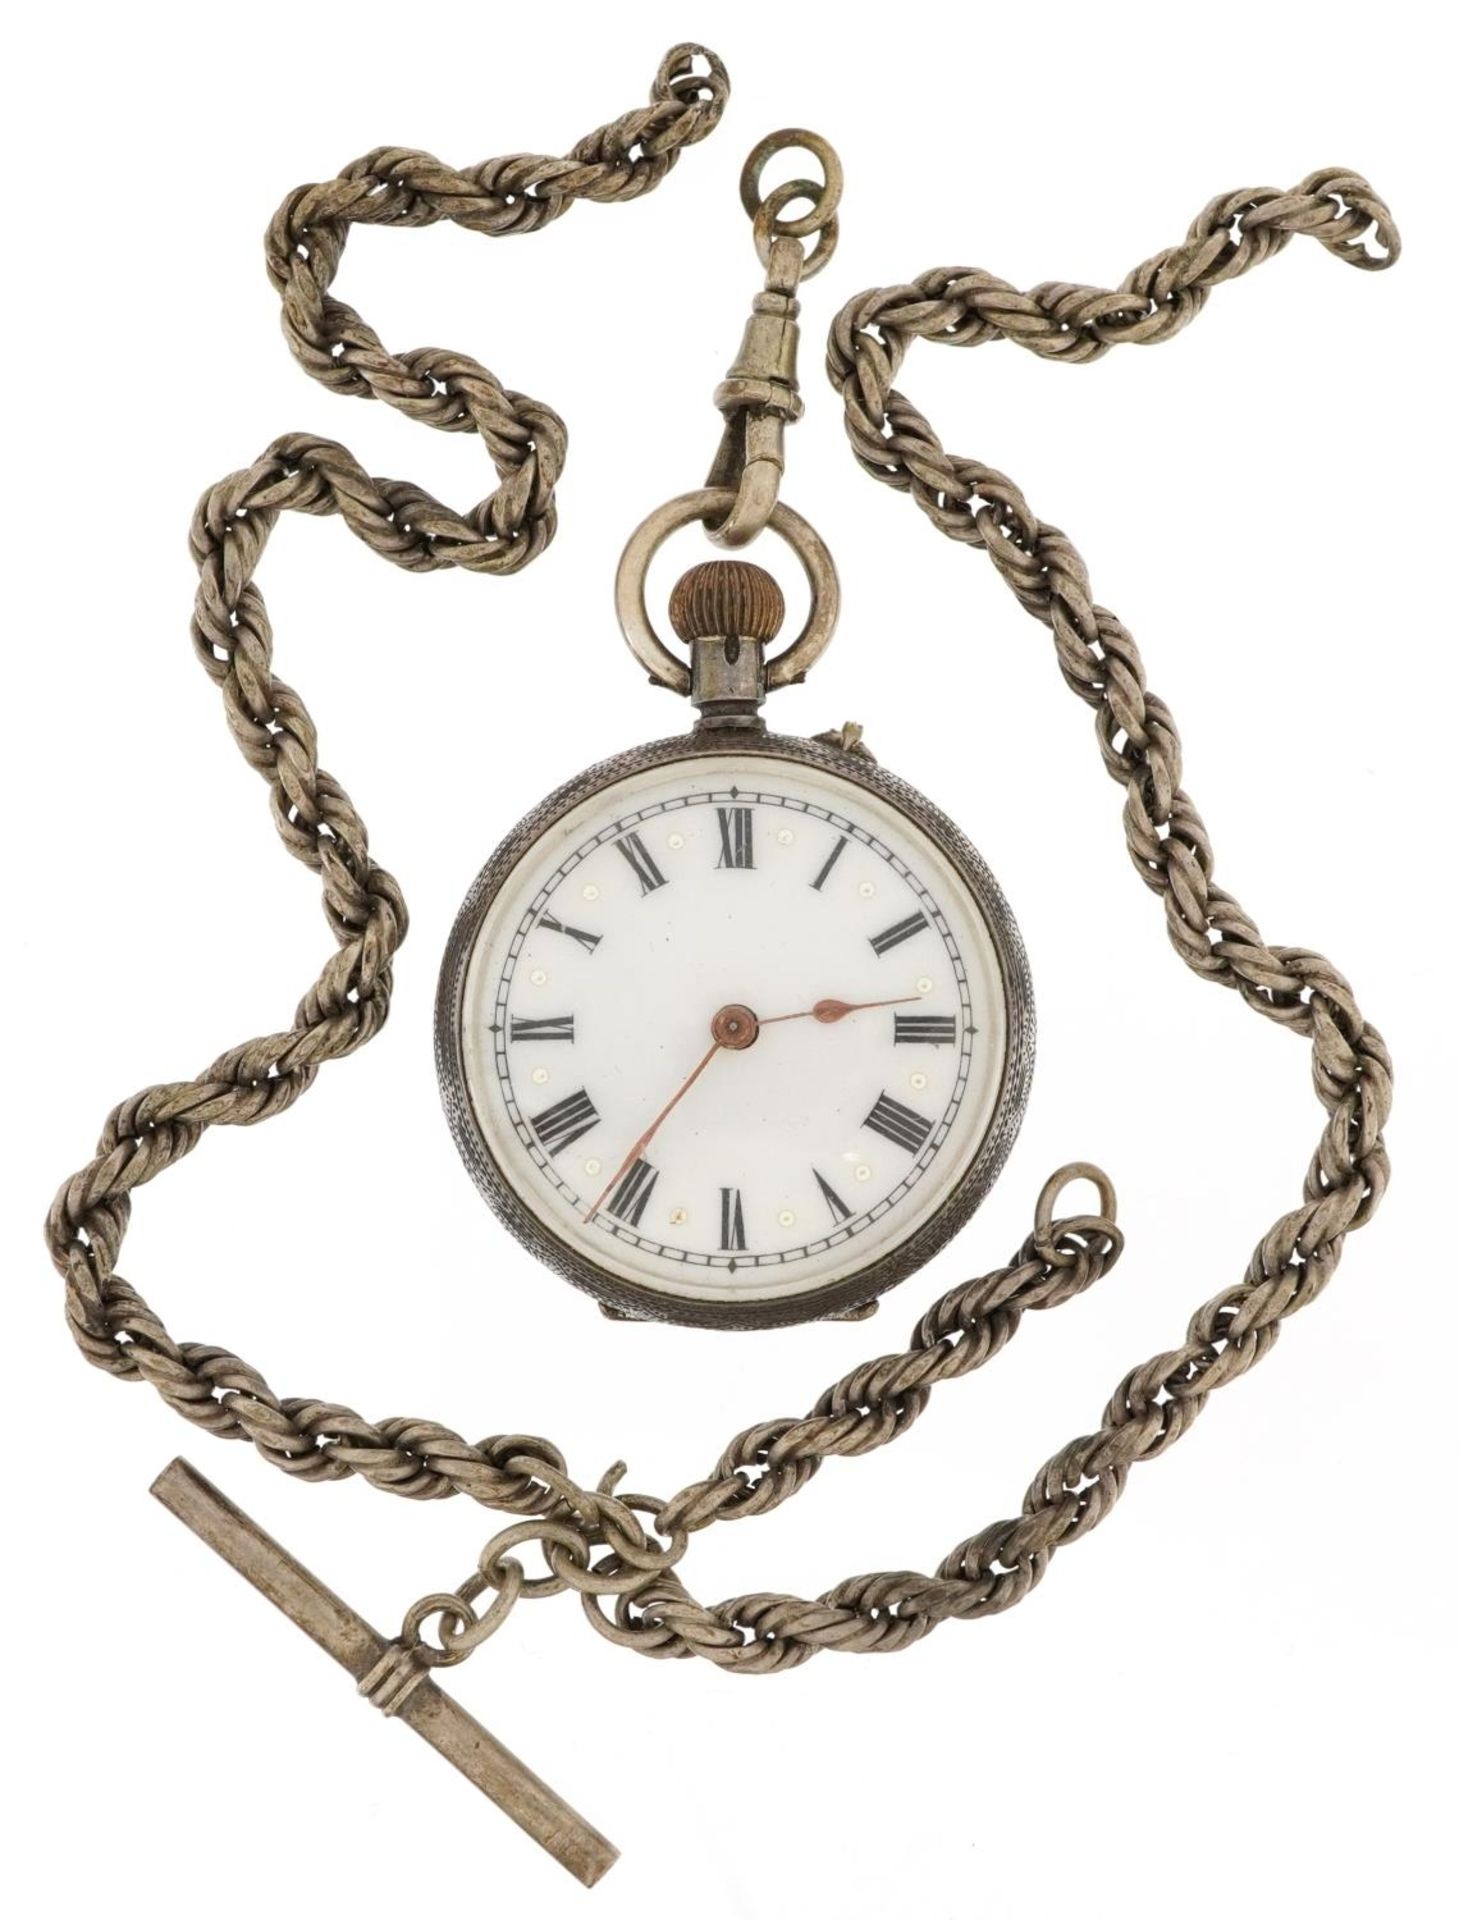 Ladies silver open face pocket watch with enamelled dial on 800 grade silver rope twist watch chain,